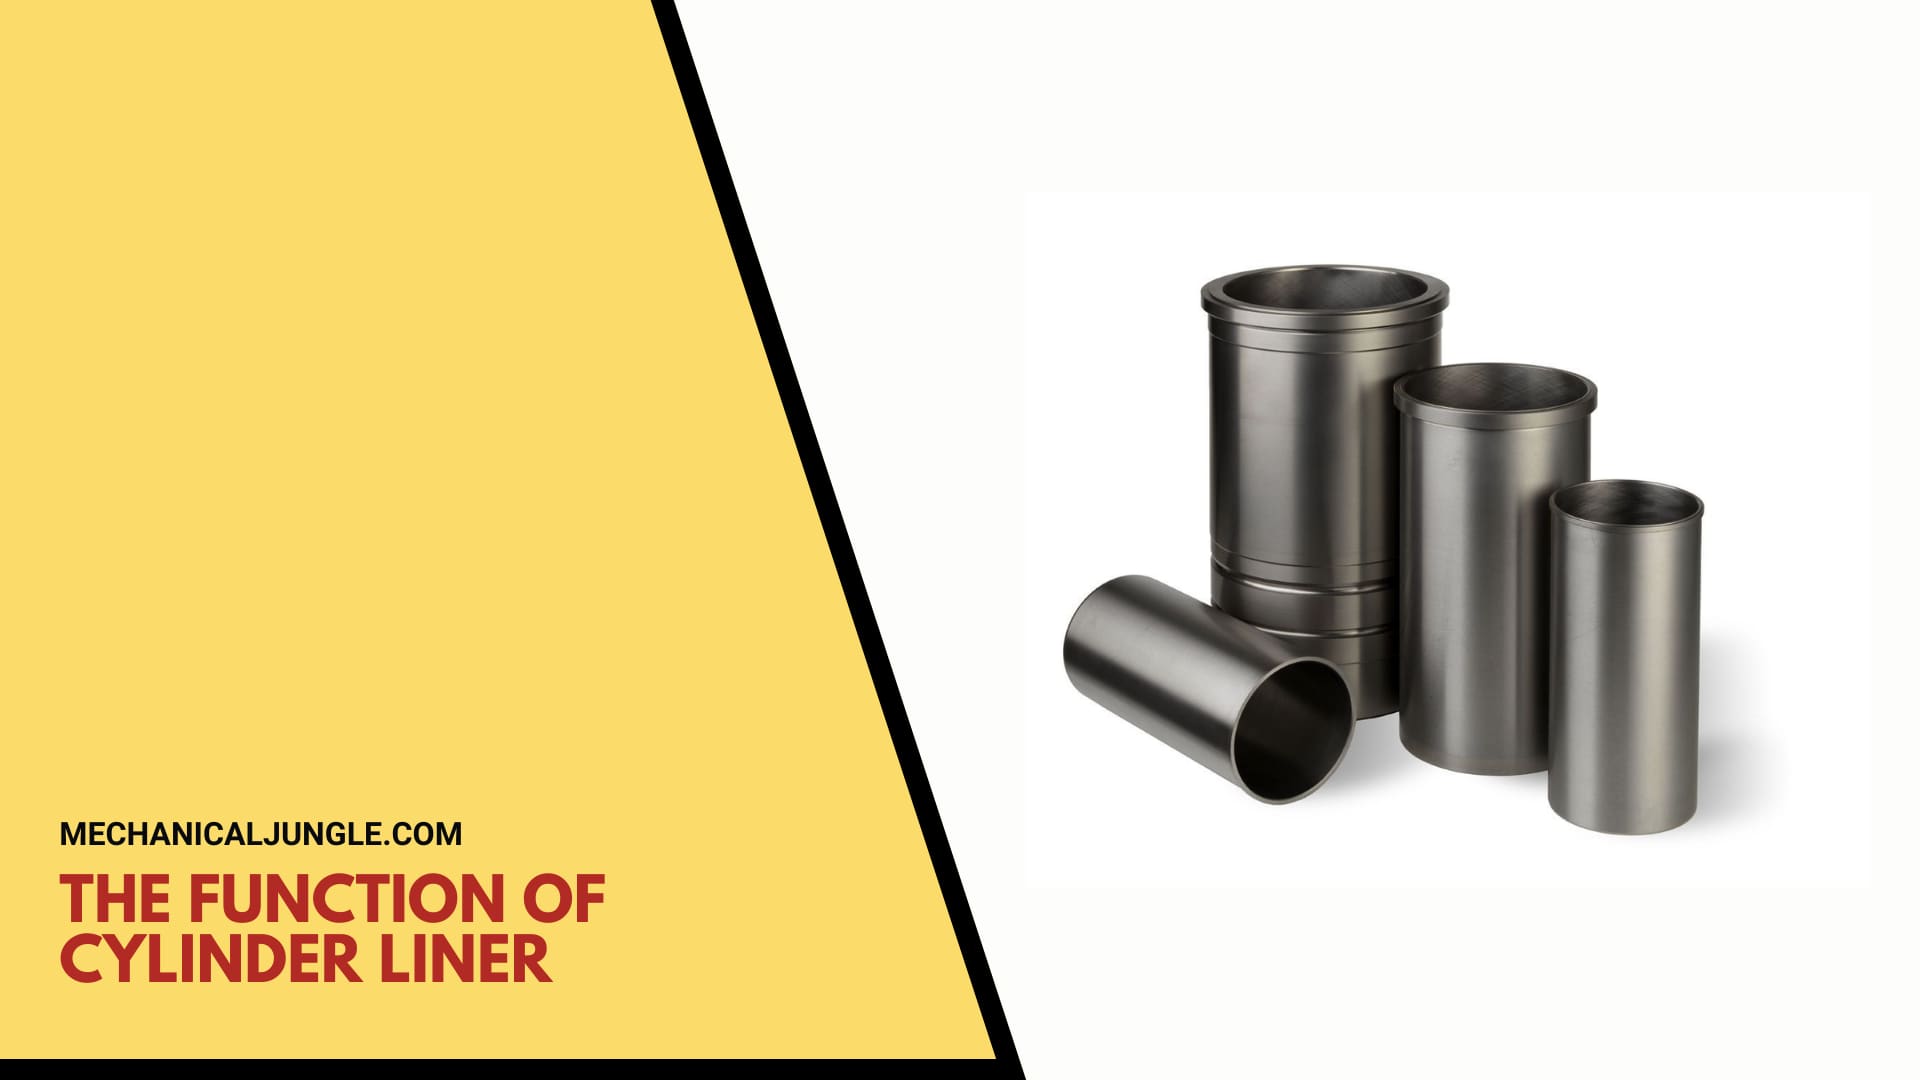 The Function of Cylinder Liner